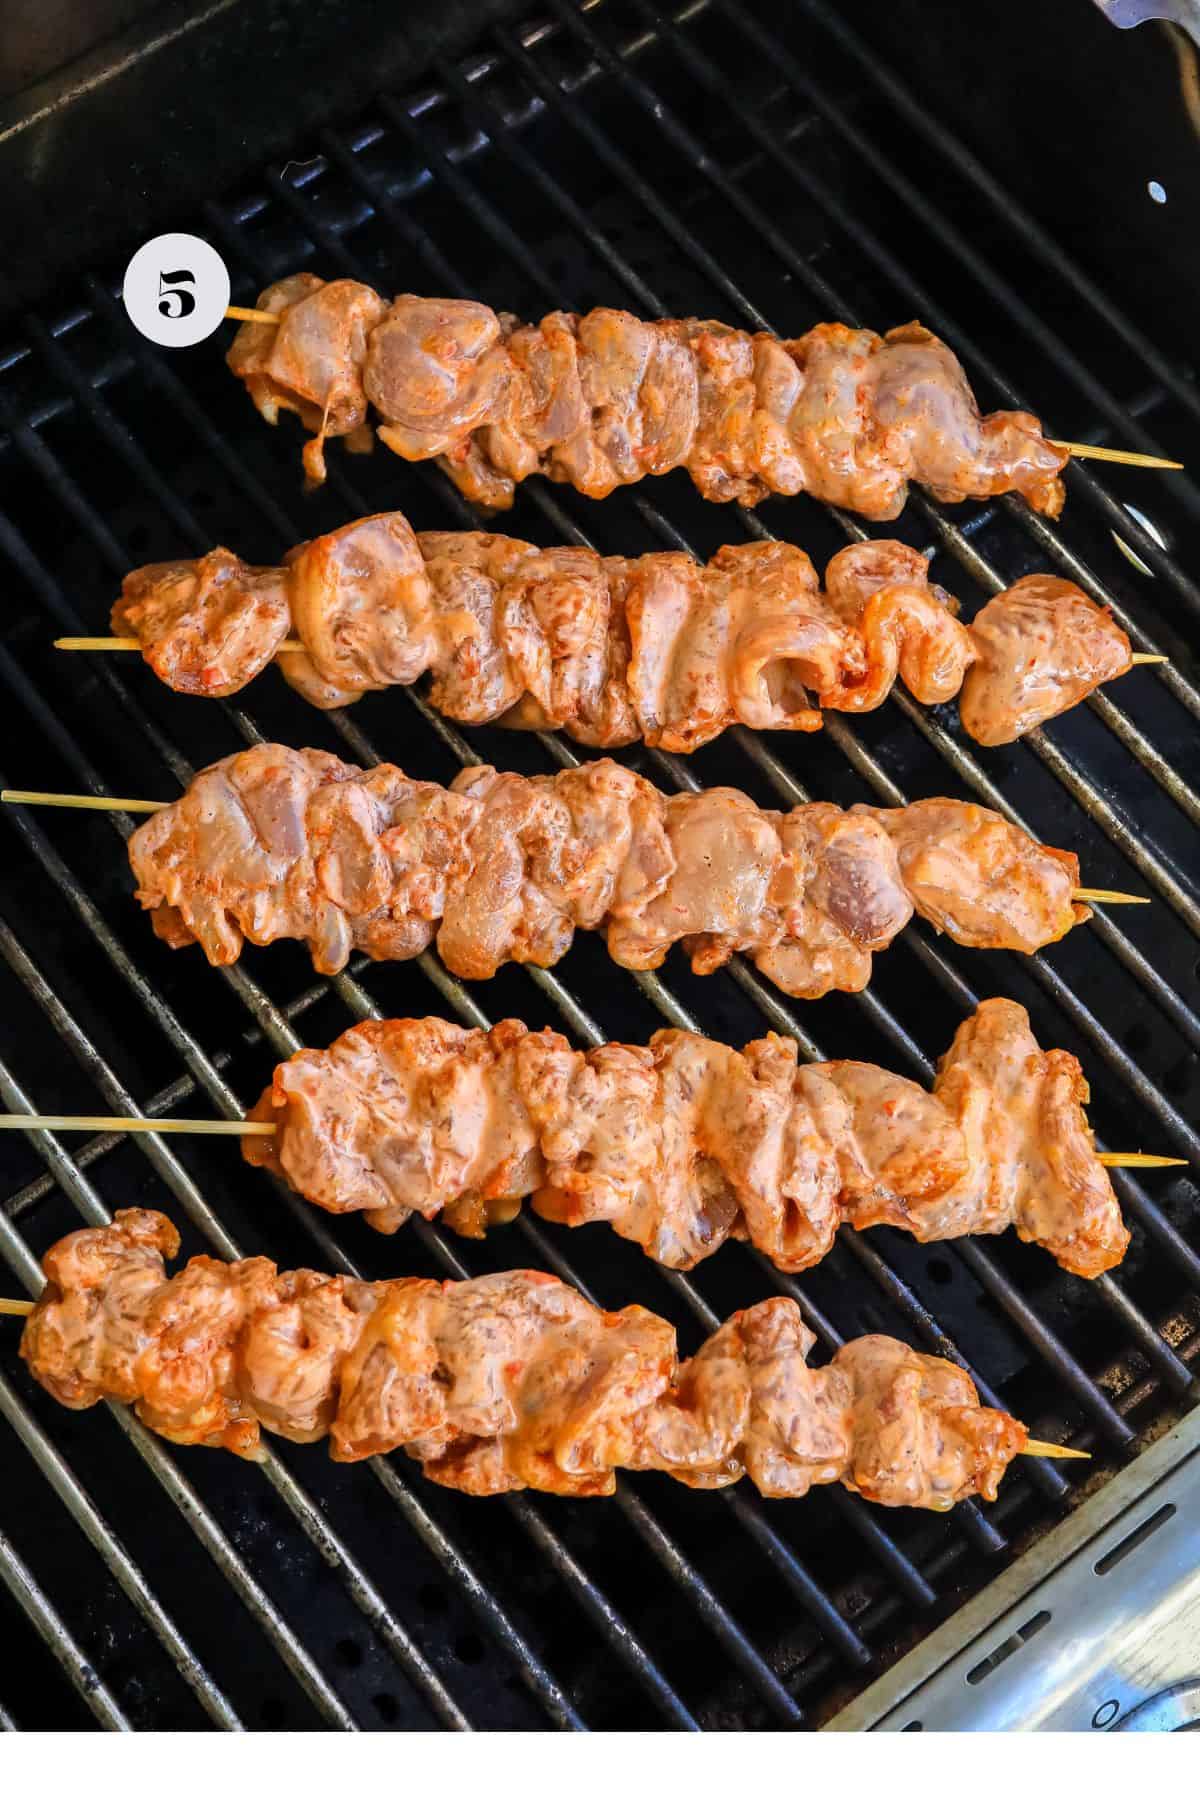 Grill with spicy chicken skewers on it with wooden sticks. 